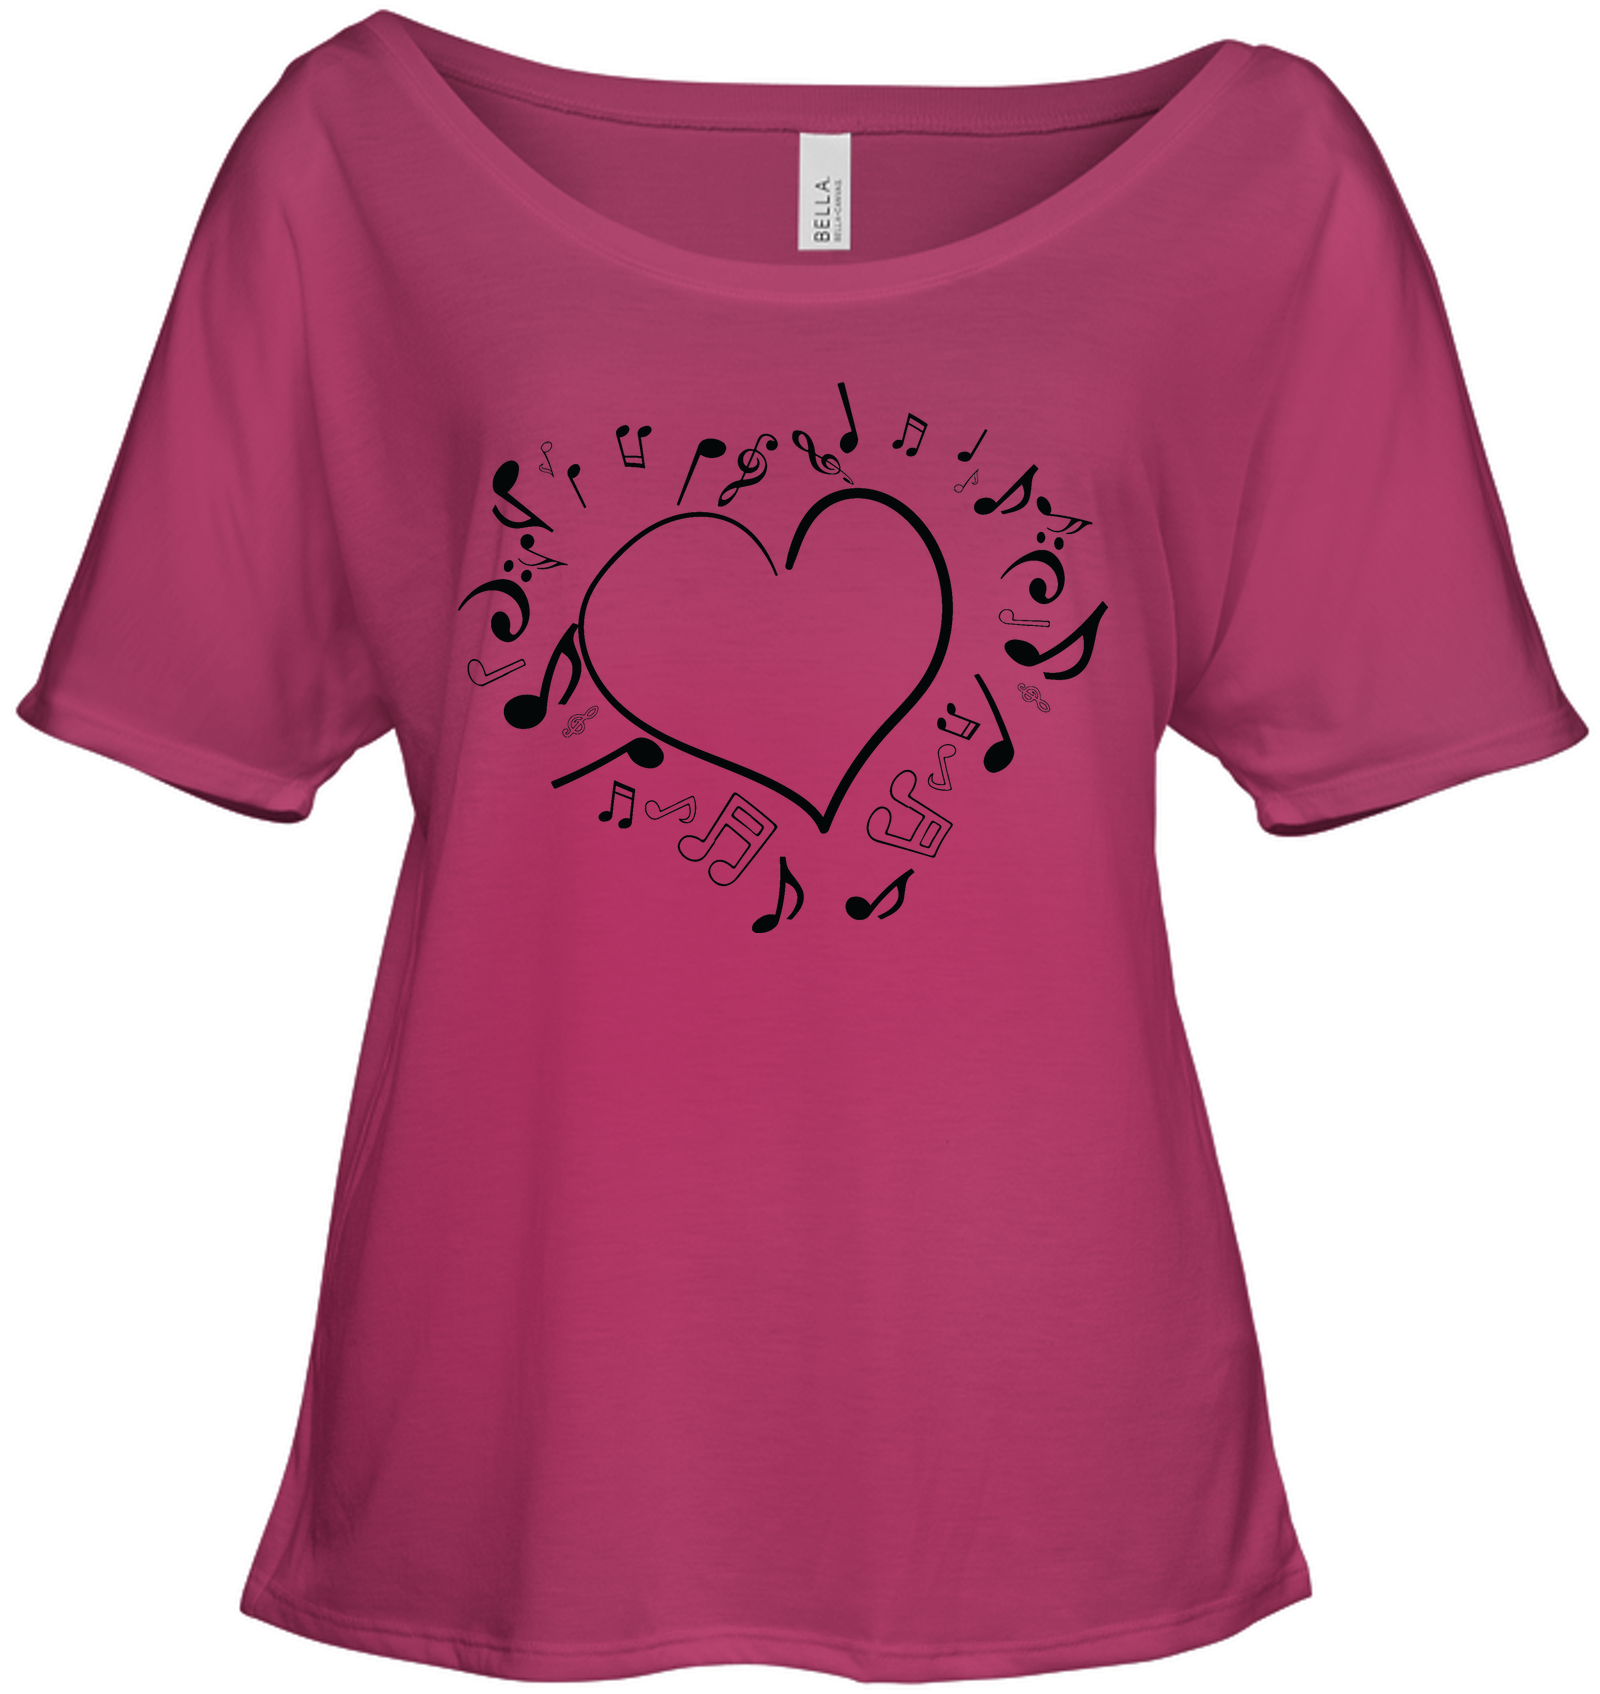 Floating Notes Heart Black - Bella + Canvas Women's Slouchy Tee